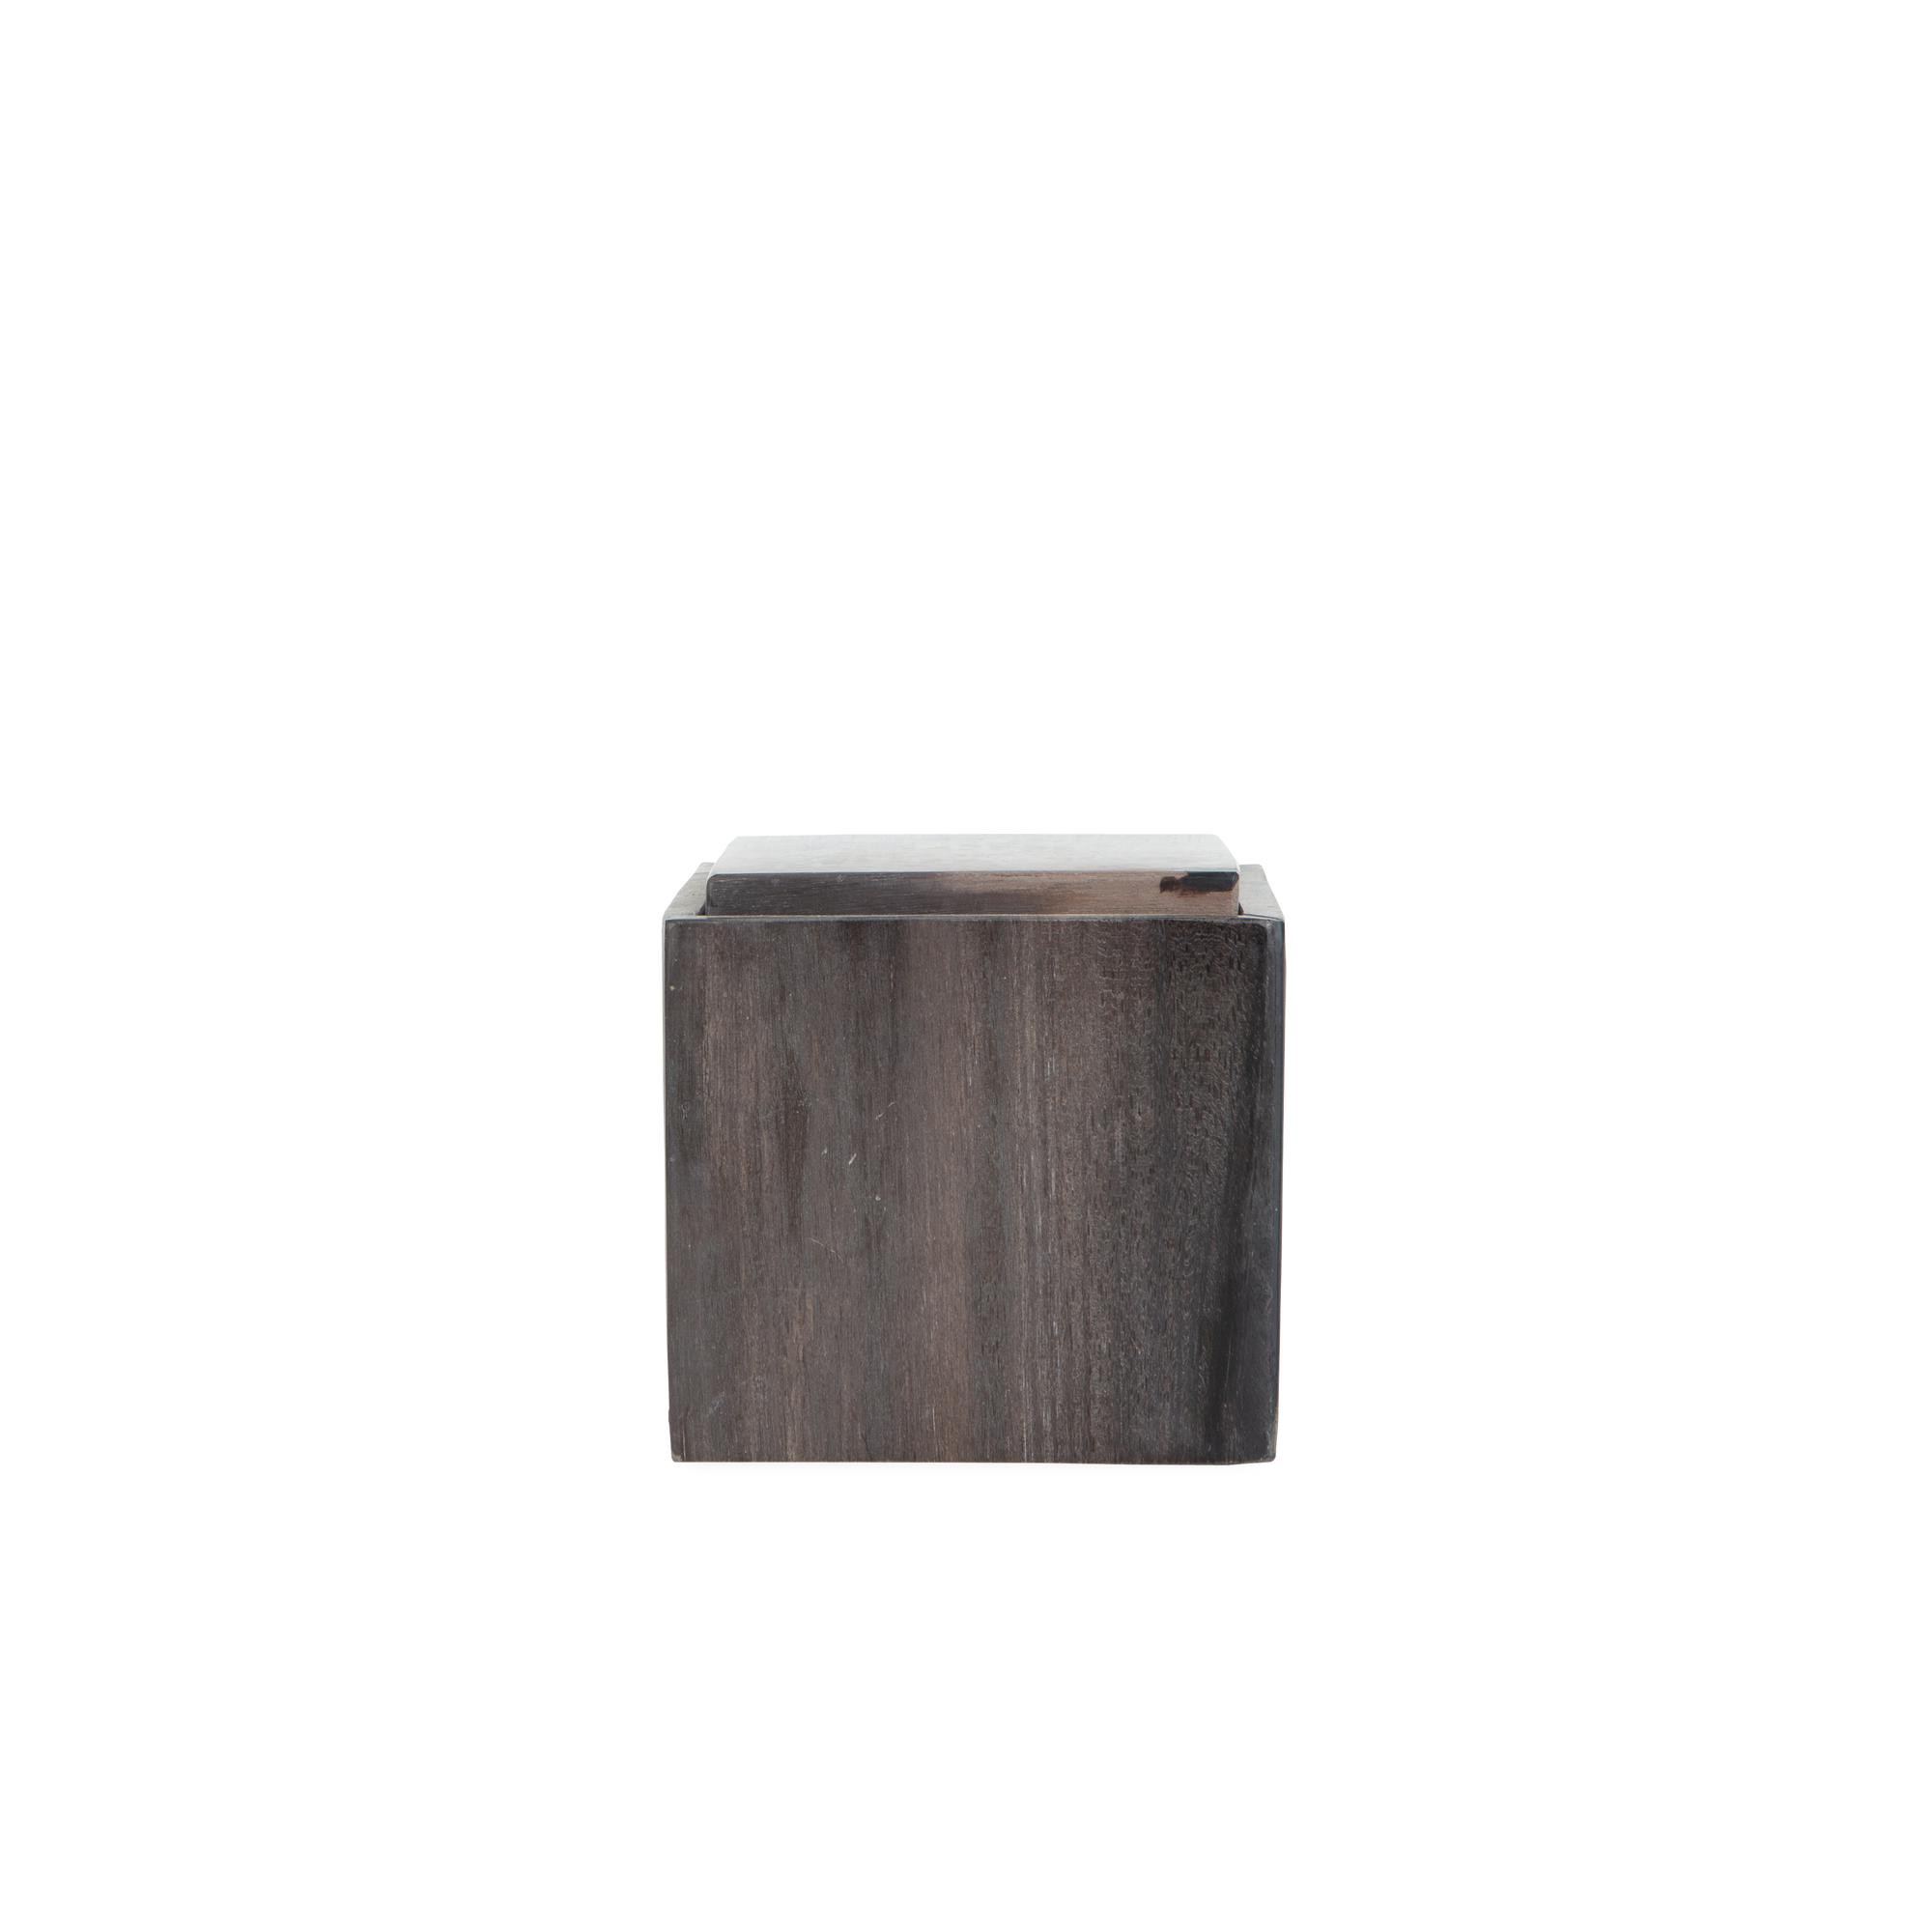 Uniquely captivating and full of textural appeal, the Petrified Wood Box features simple lines and an organic shape.